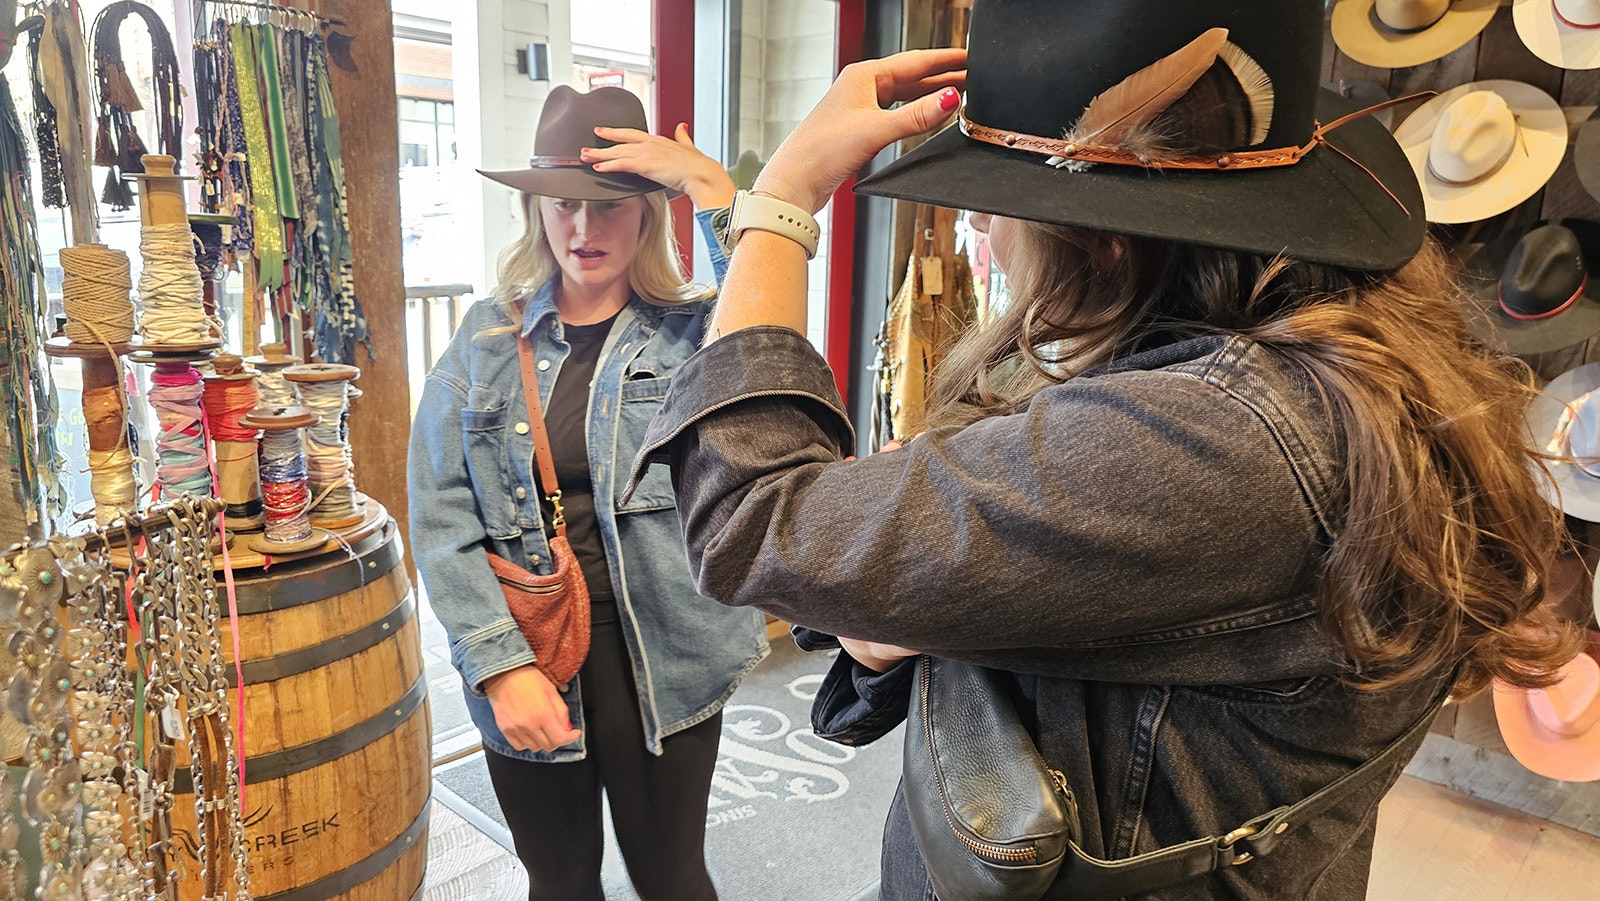 Anne Marie Cress, left, listens as her girlfriends Mary Sullivan, right, and Megan Prez (not pictured) advise her on the look of her hat.